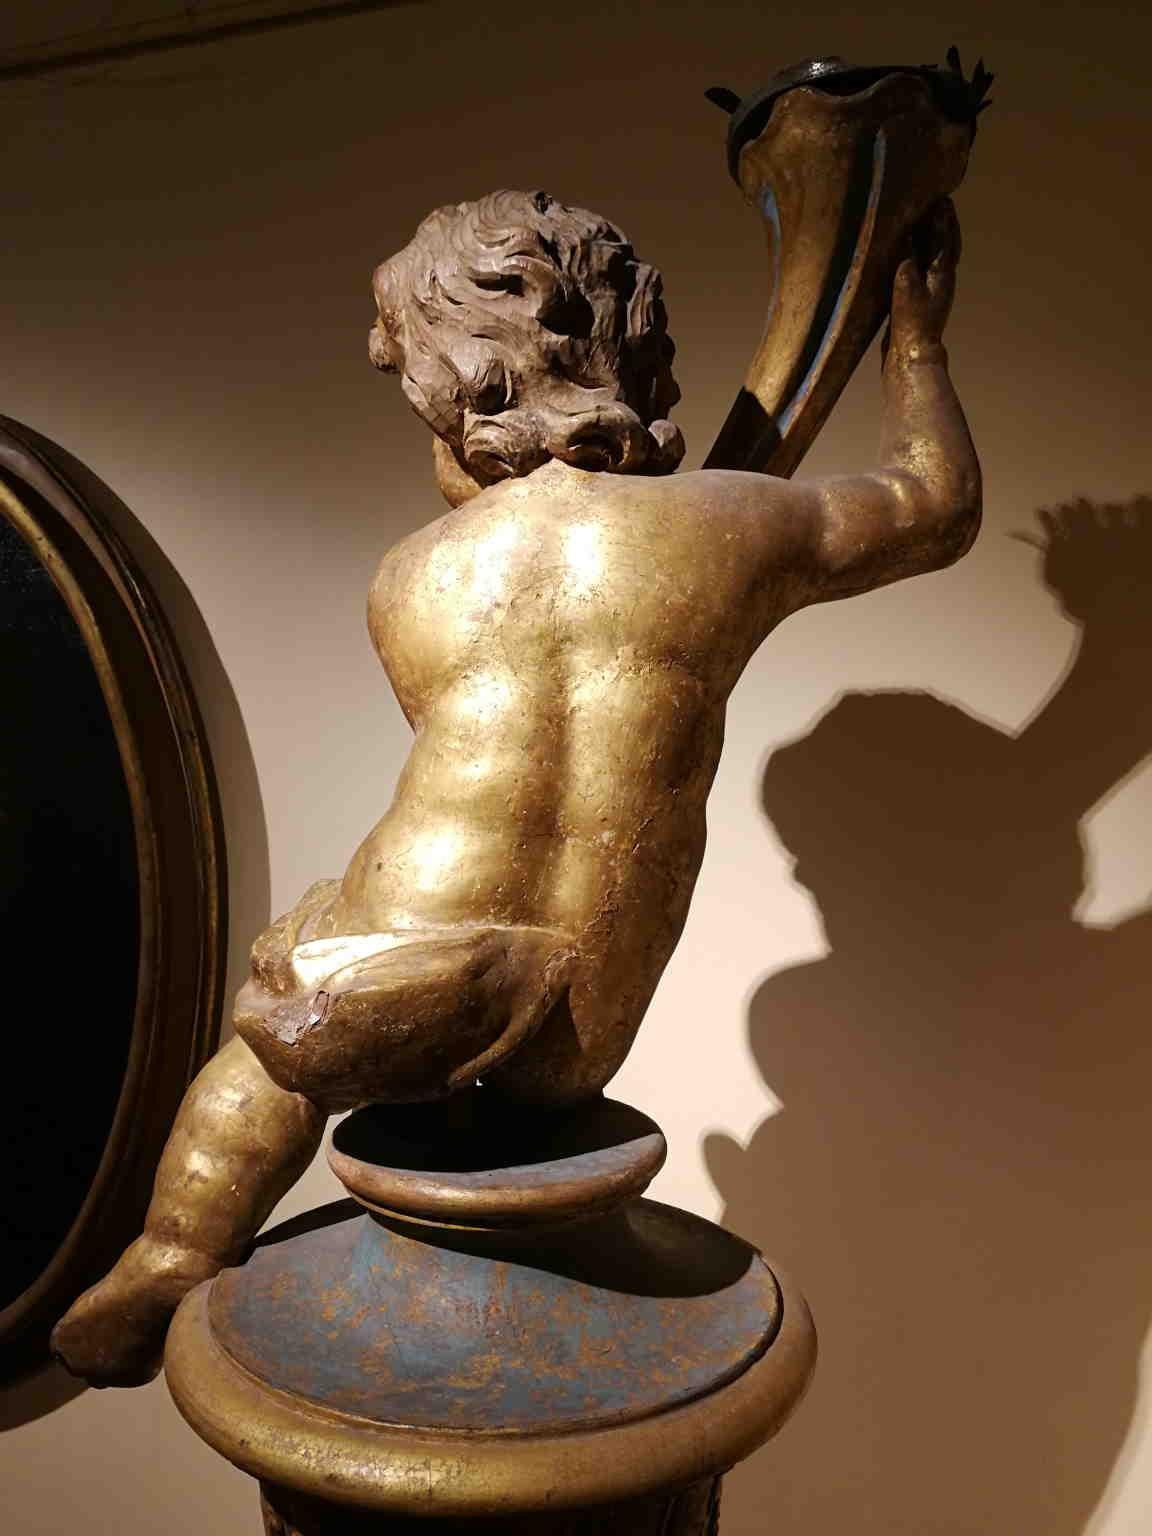 One flame candle holder putto made of gilded wood.
Those kind of objects were present in churches or noble villas, specially during the Baroque times. 

The base is not coeval.
